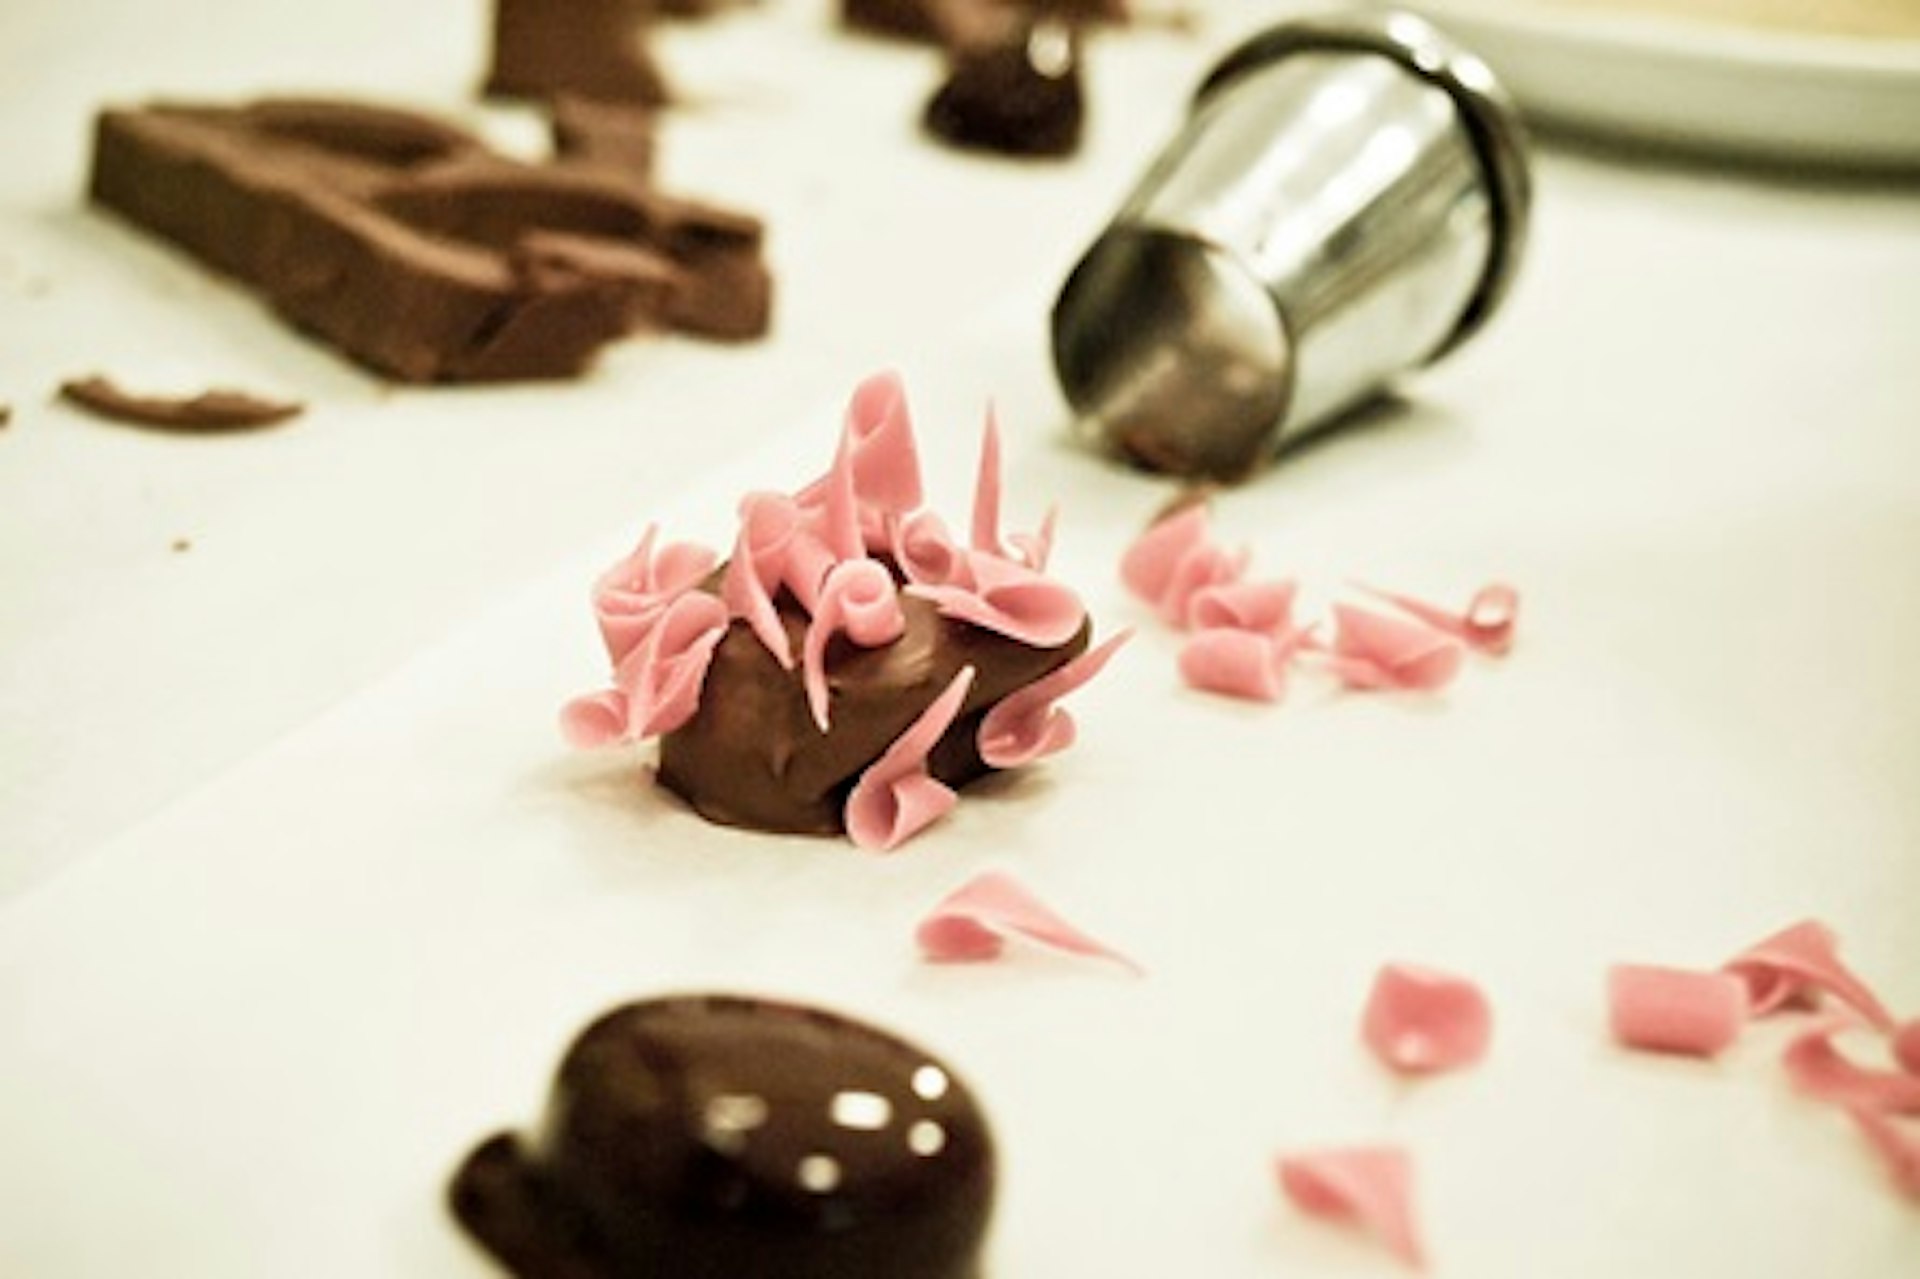 Luxury Chocolate Making Workshop Including Martini and Bubbly with My Chocolate